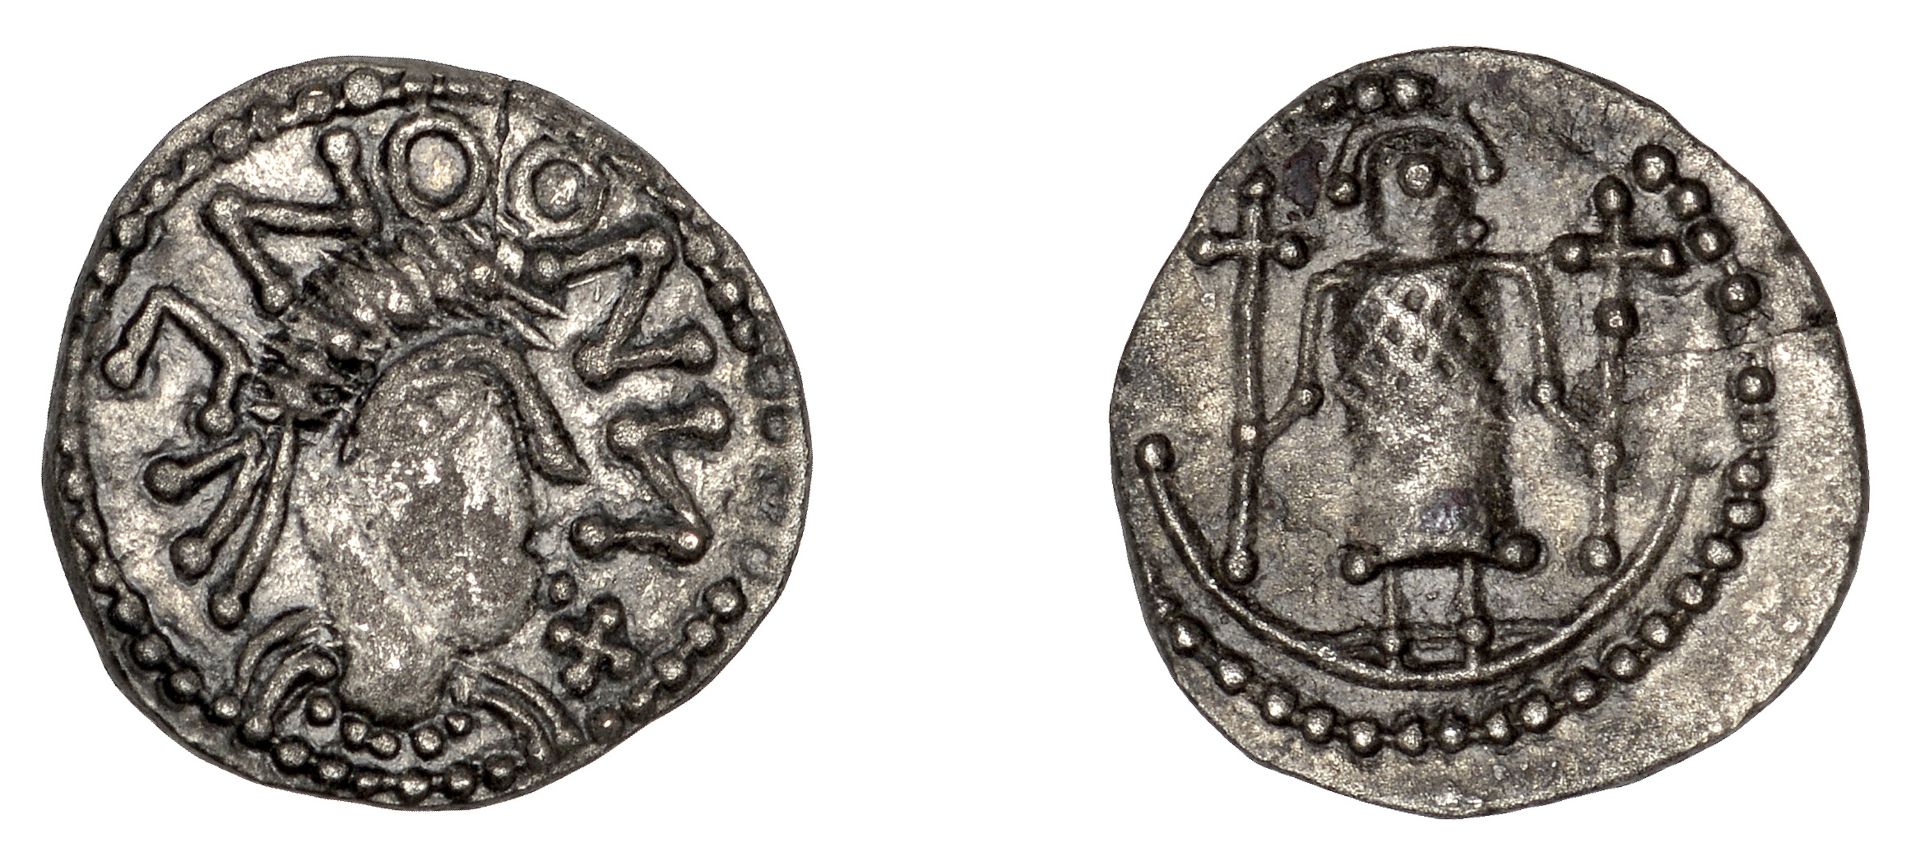 Early Anglo-Saxon Period, Sceatta, Secondary series L, type 12, diademed and draped bust rig...